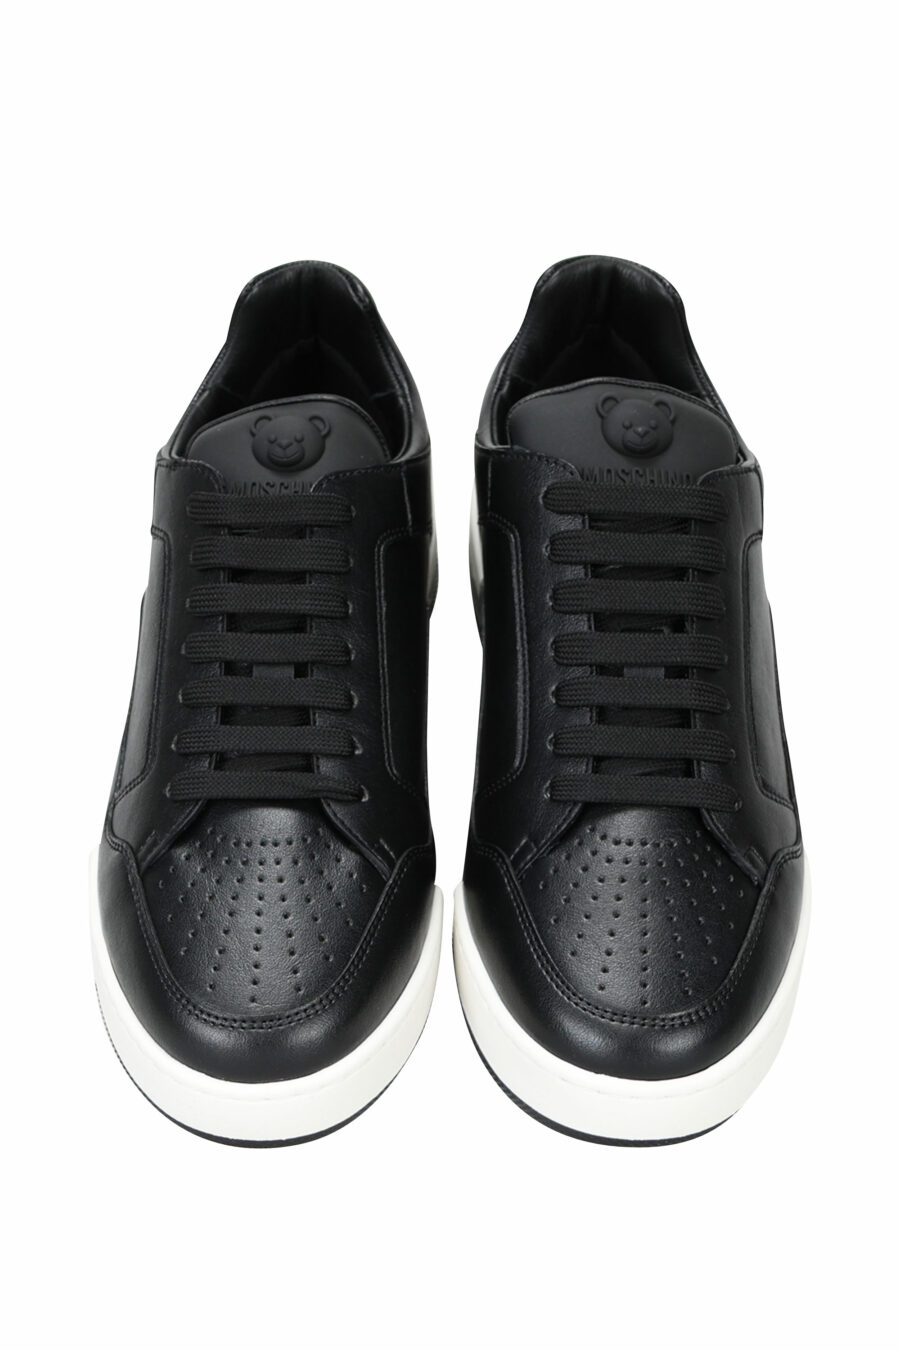 Black leather trainers with white sole and logo - 8054653096394 4